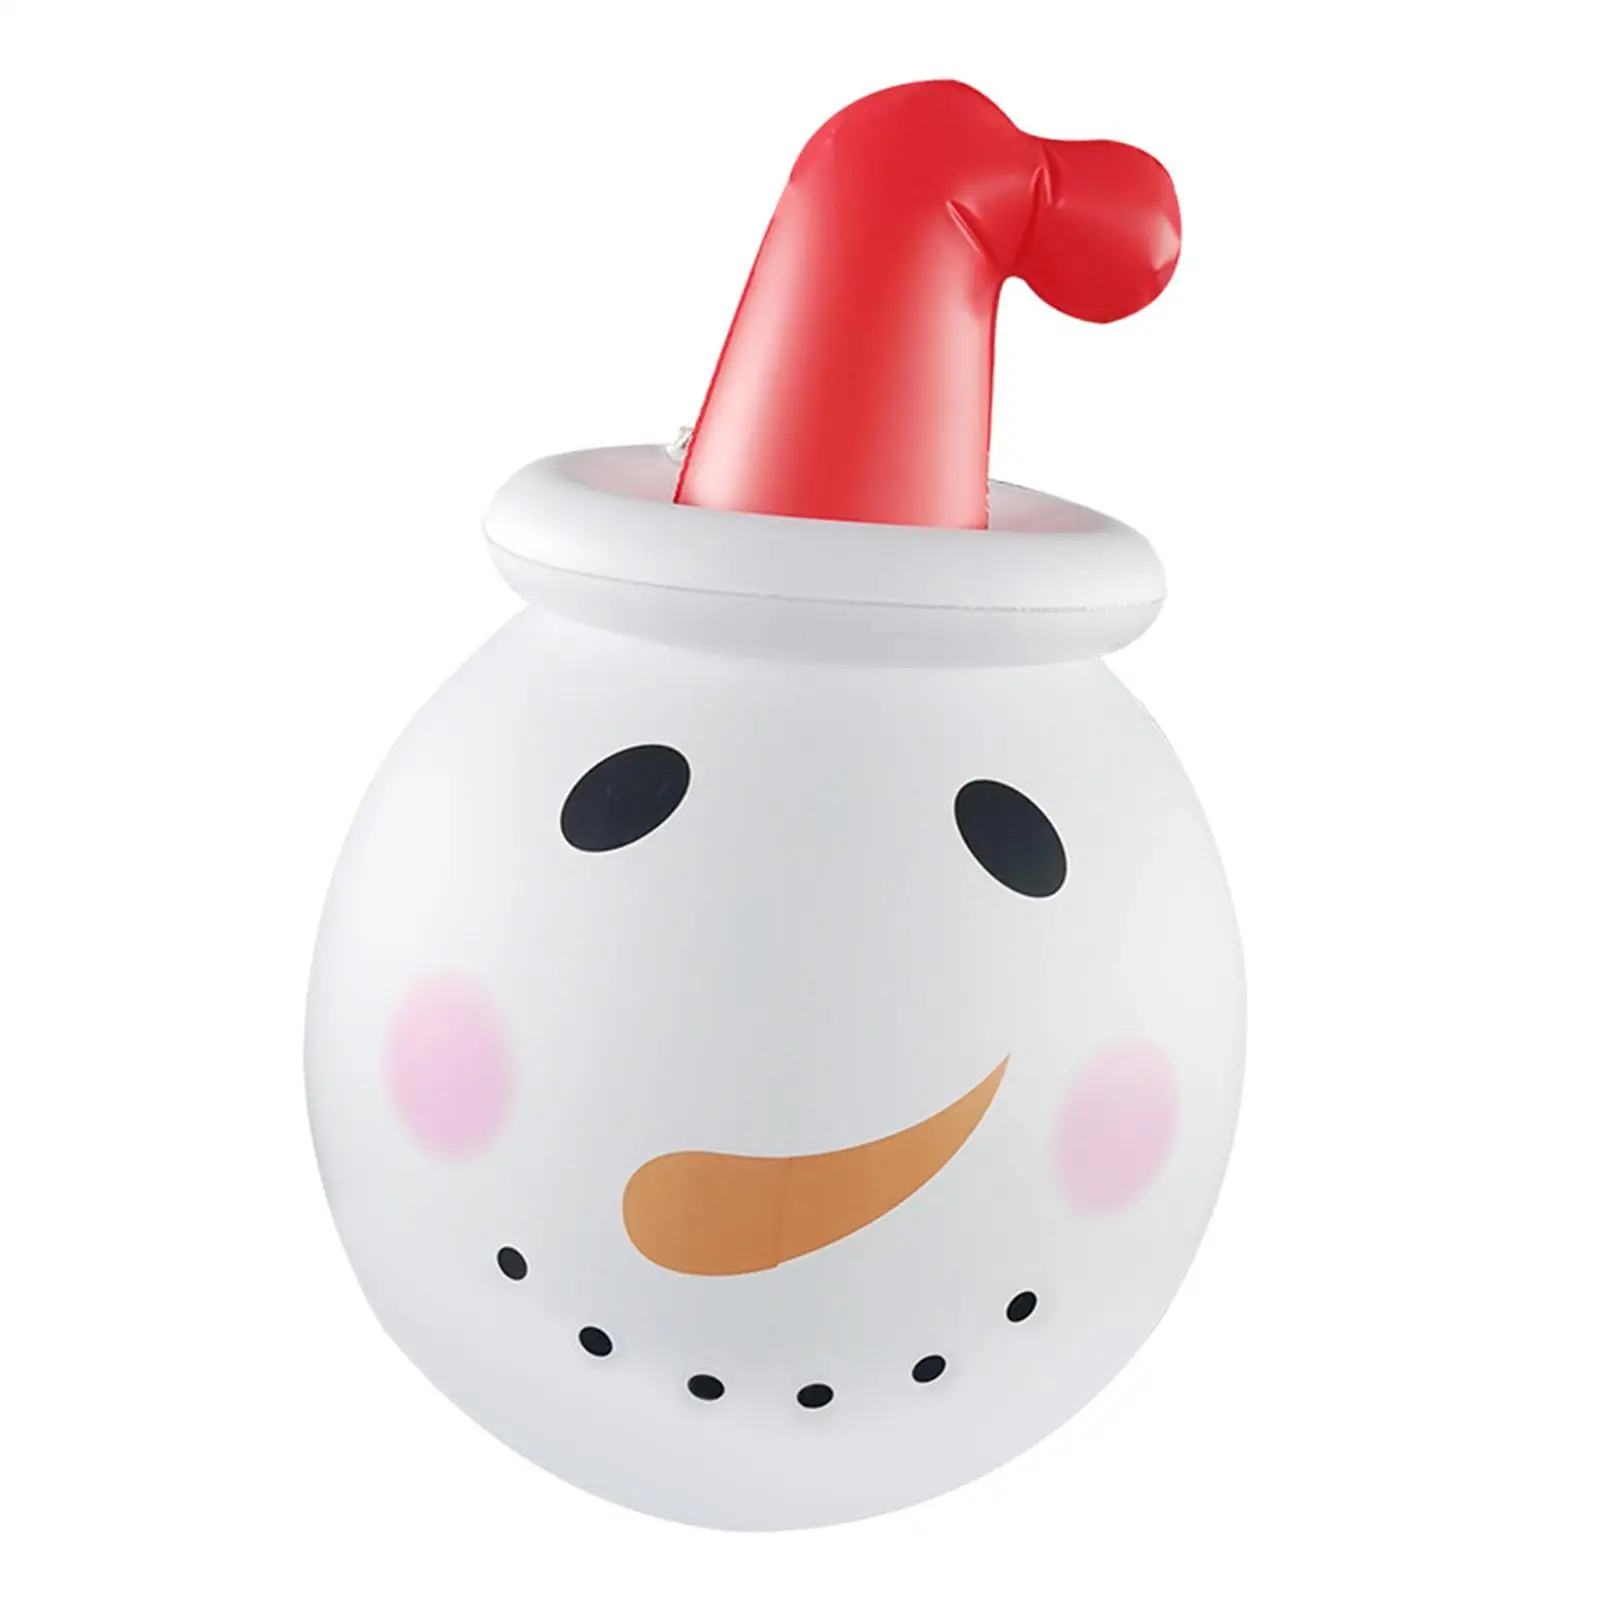 Christmas Inflatable Snowman Ornament Art for Garden Outdoor and Indoor